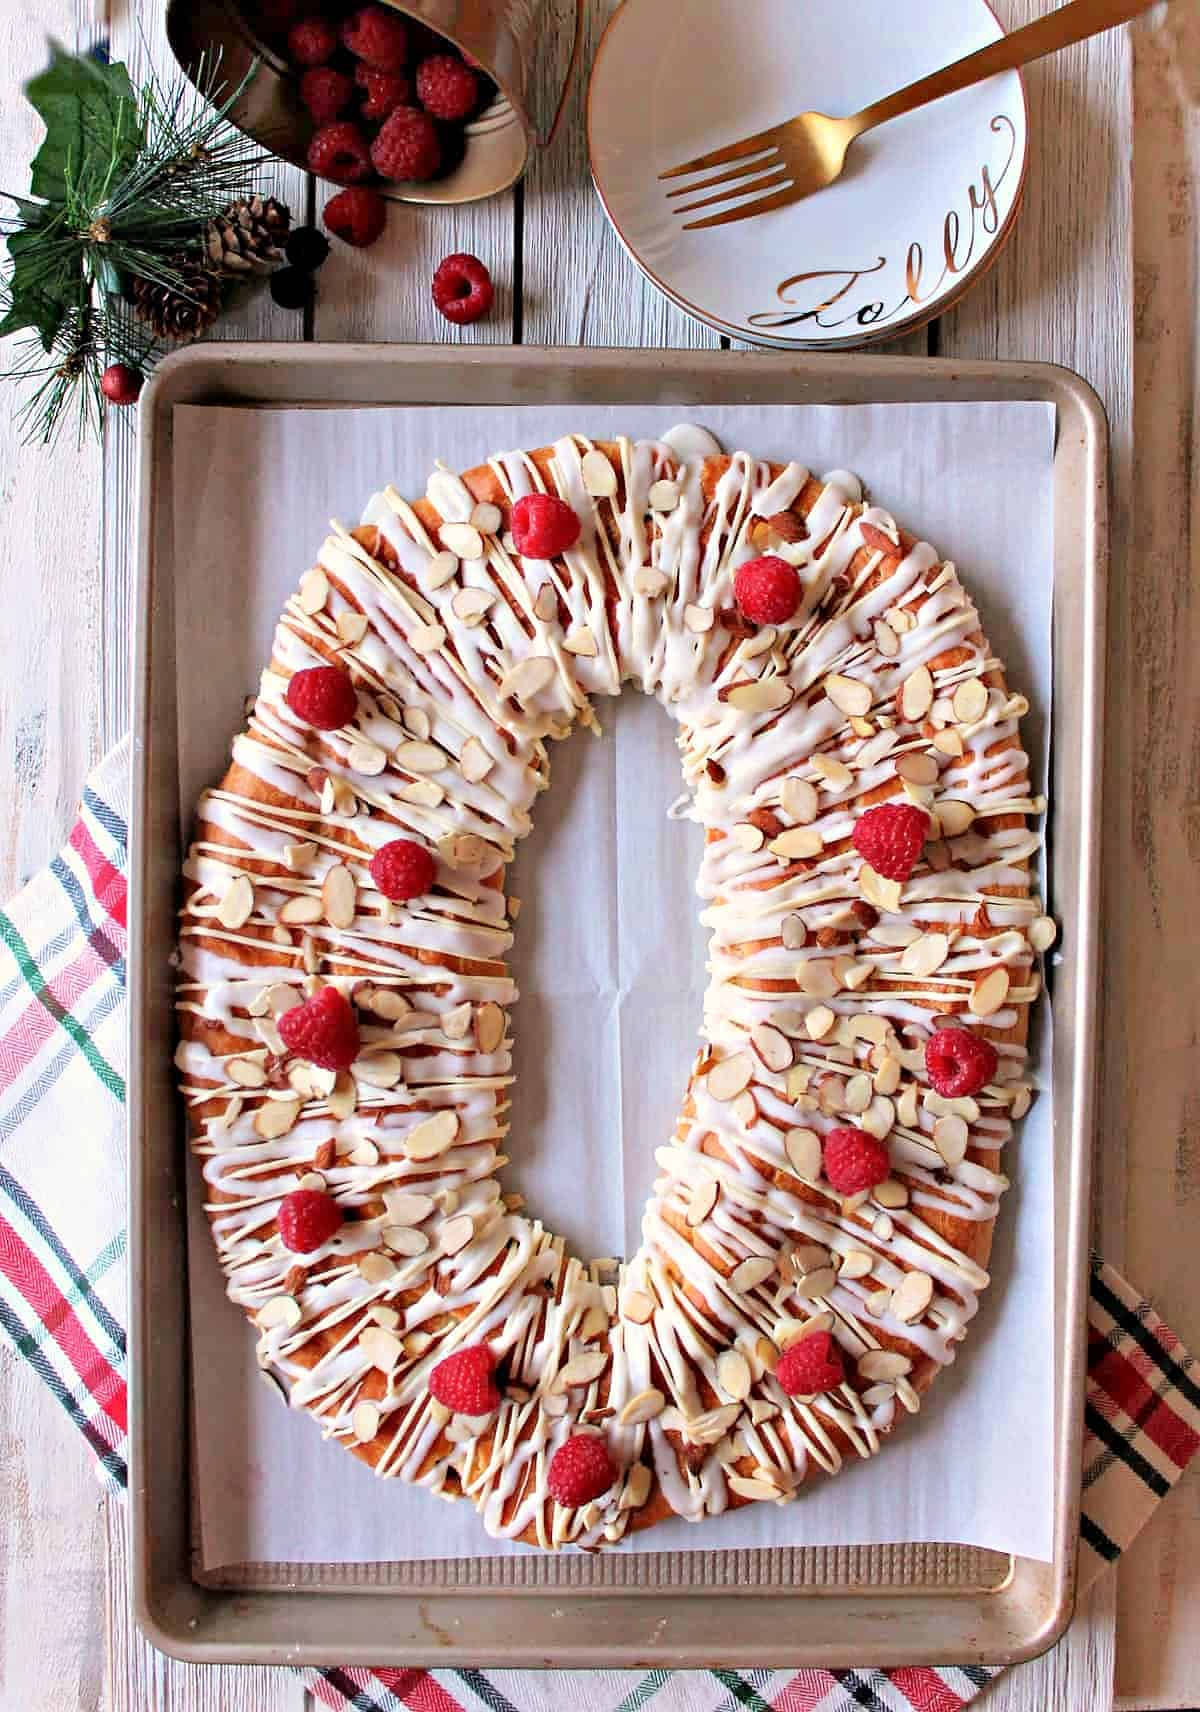 Raspberry White Chocolate Almond Kringle! Beautiful pastry studded with fresh raspberries, sweet drizzle & crunchy almonds. A perfect holiday breakfast.